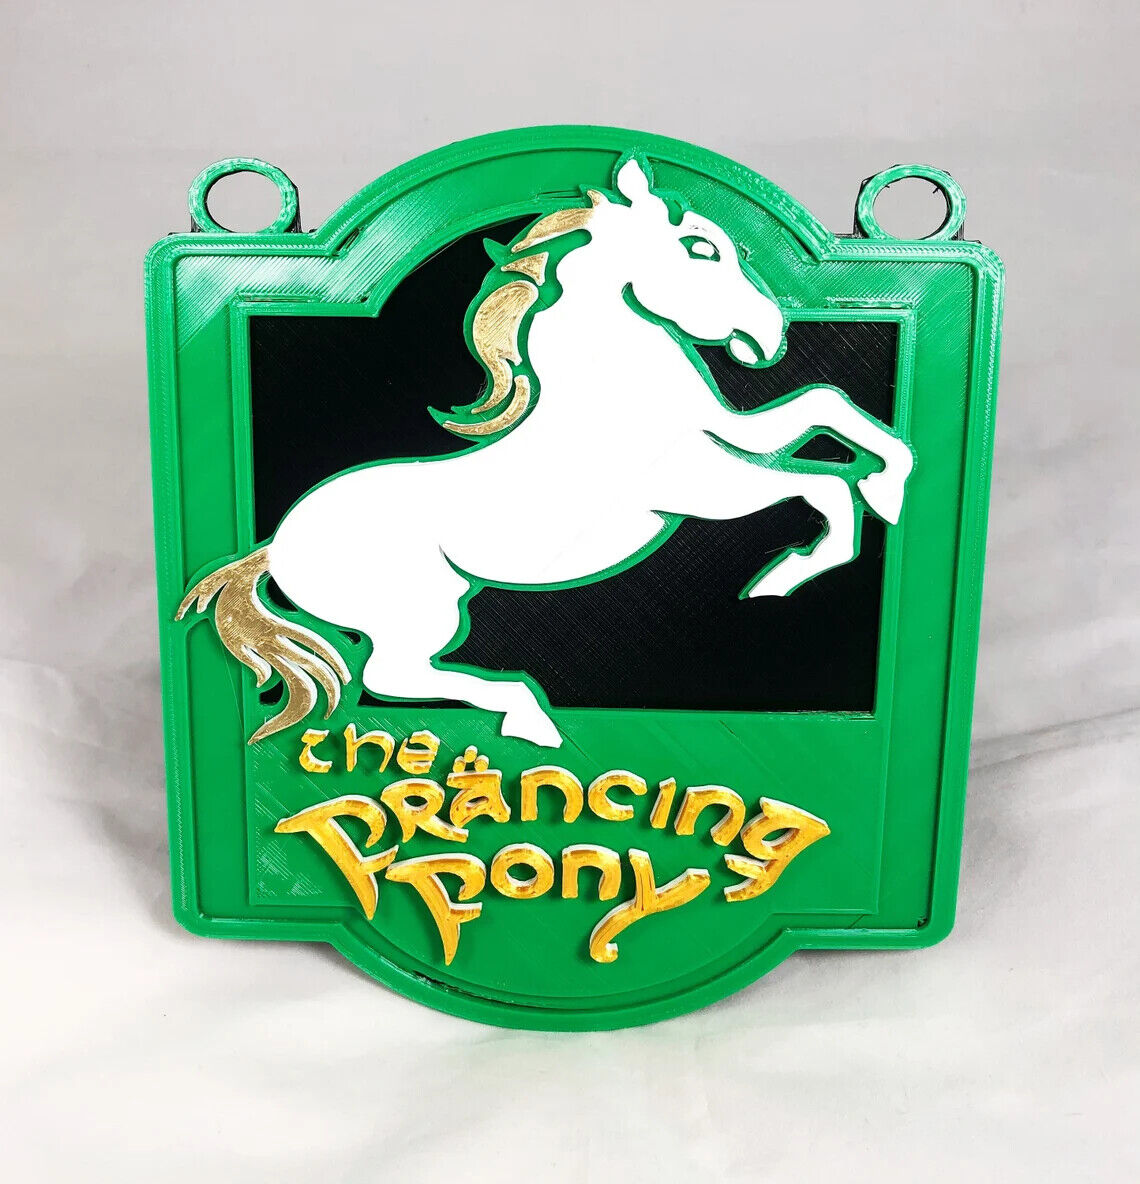 3d Lord Of The Rings Inspired Prancing Pony Pub Tavern Homemade Sign Inn At Bree